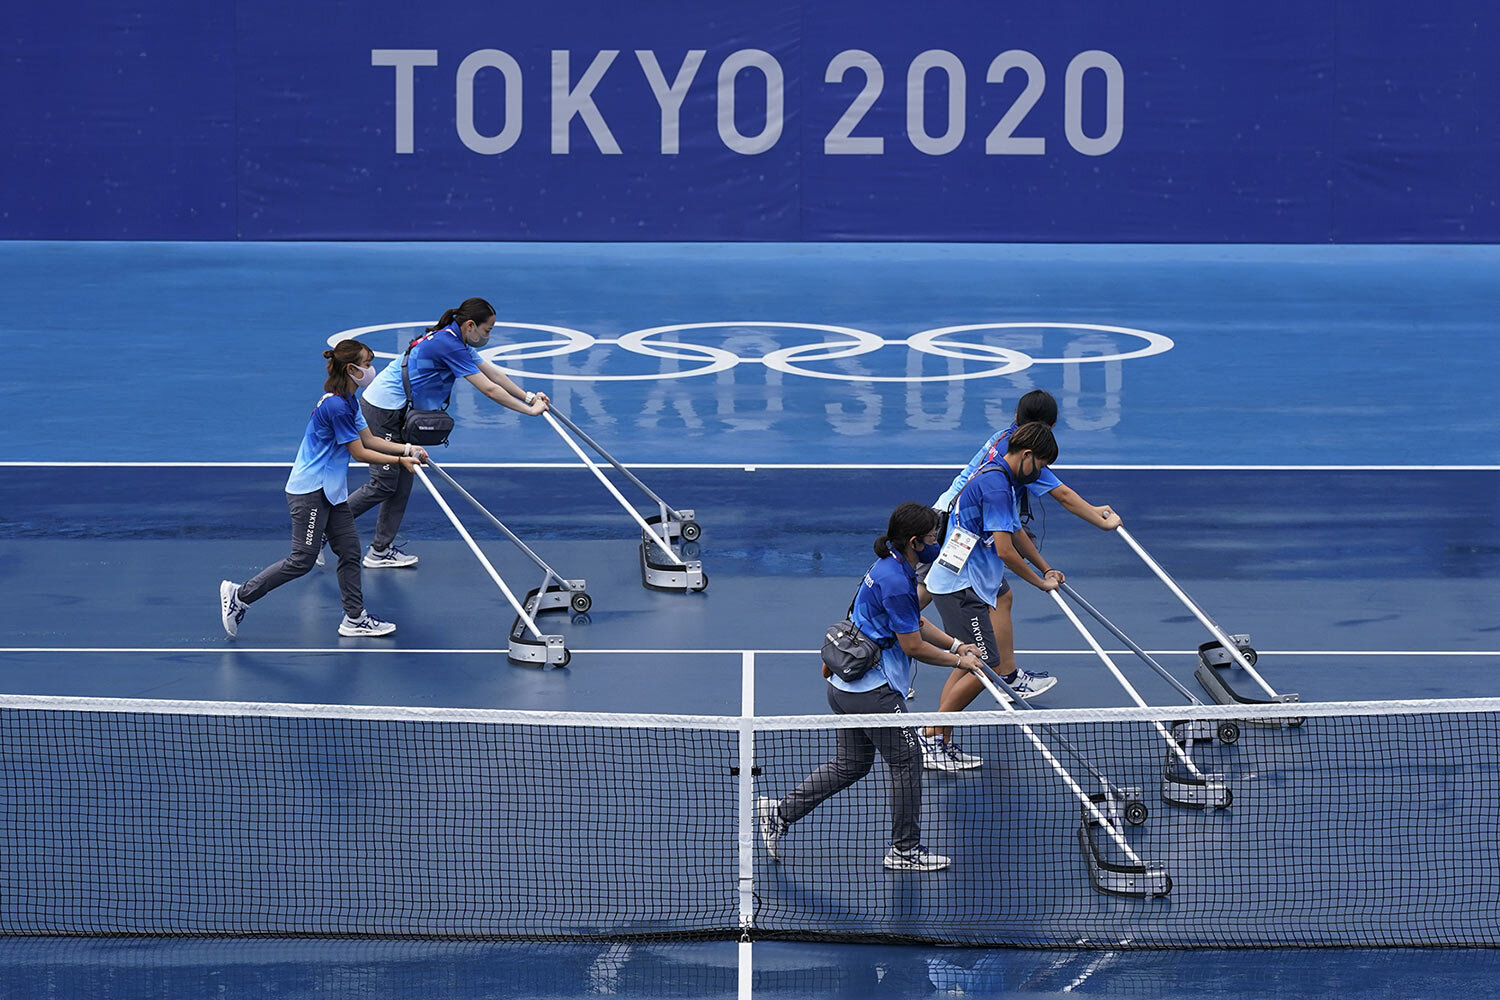  Workers push water off of a court during a rain delay in the tennis competition at the 2020 Summer Olympics, Tuesday, July 27, 2021, in Tokyo, Japan. (AP Photo/Patrick Semansky) 